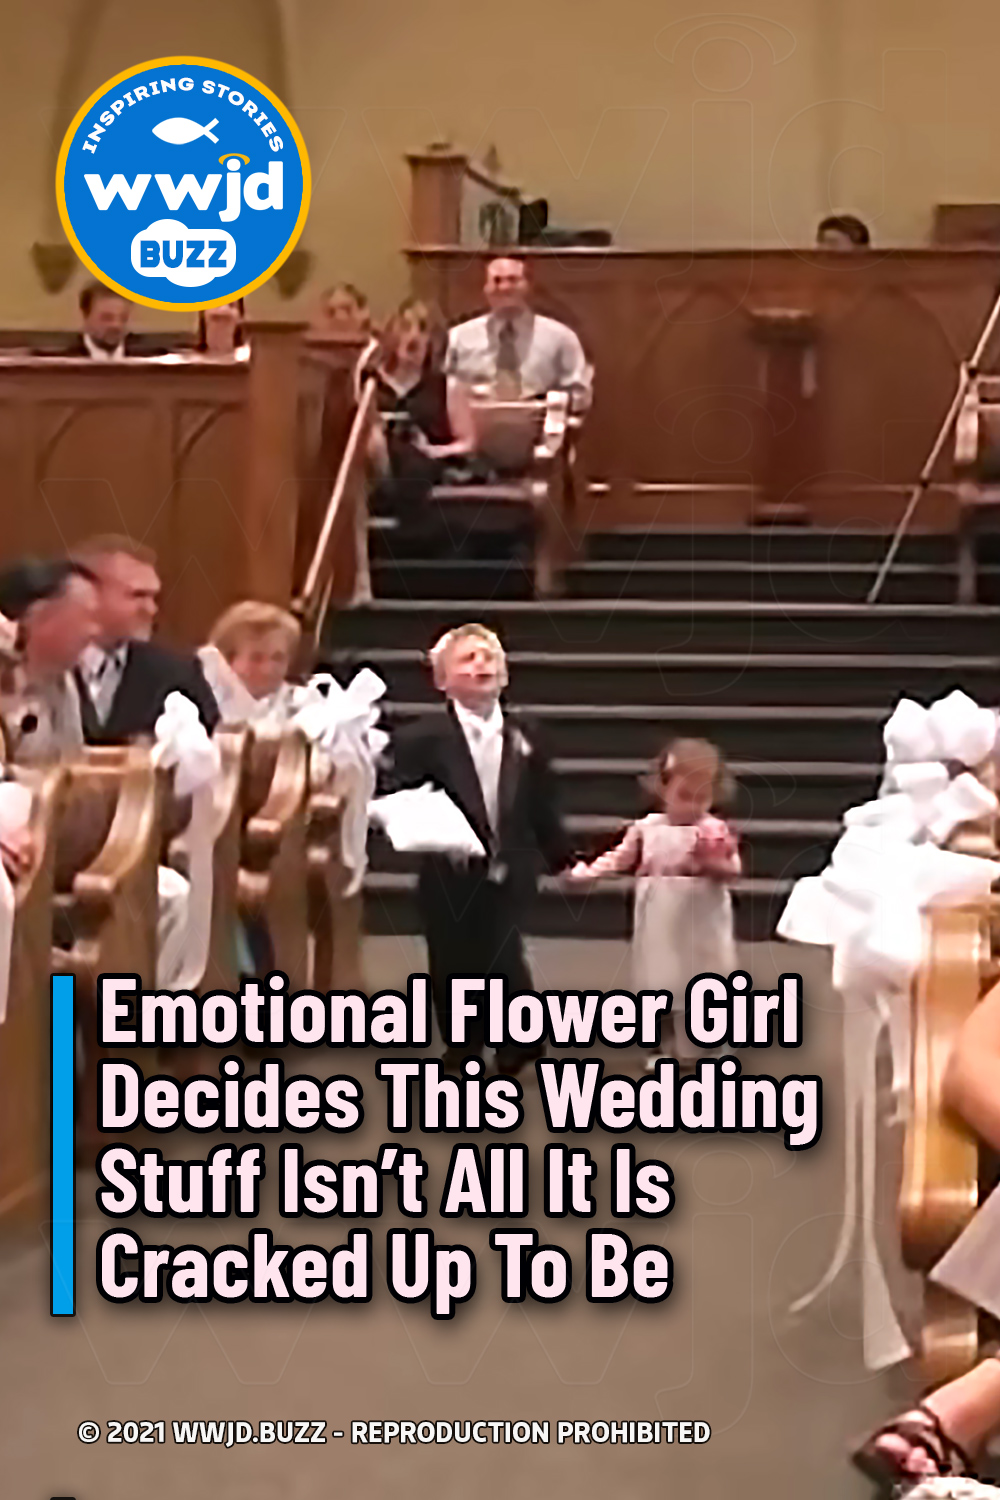 Emotional Flower Girl Decides This Wedding Stuff Isn’t All It Is Cracked Up To Be